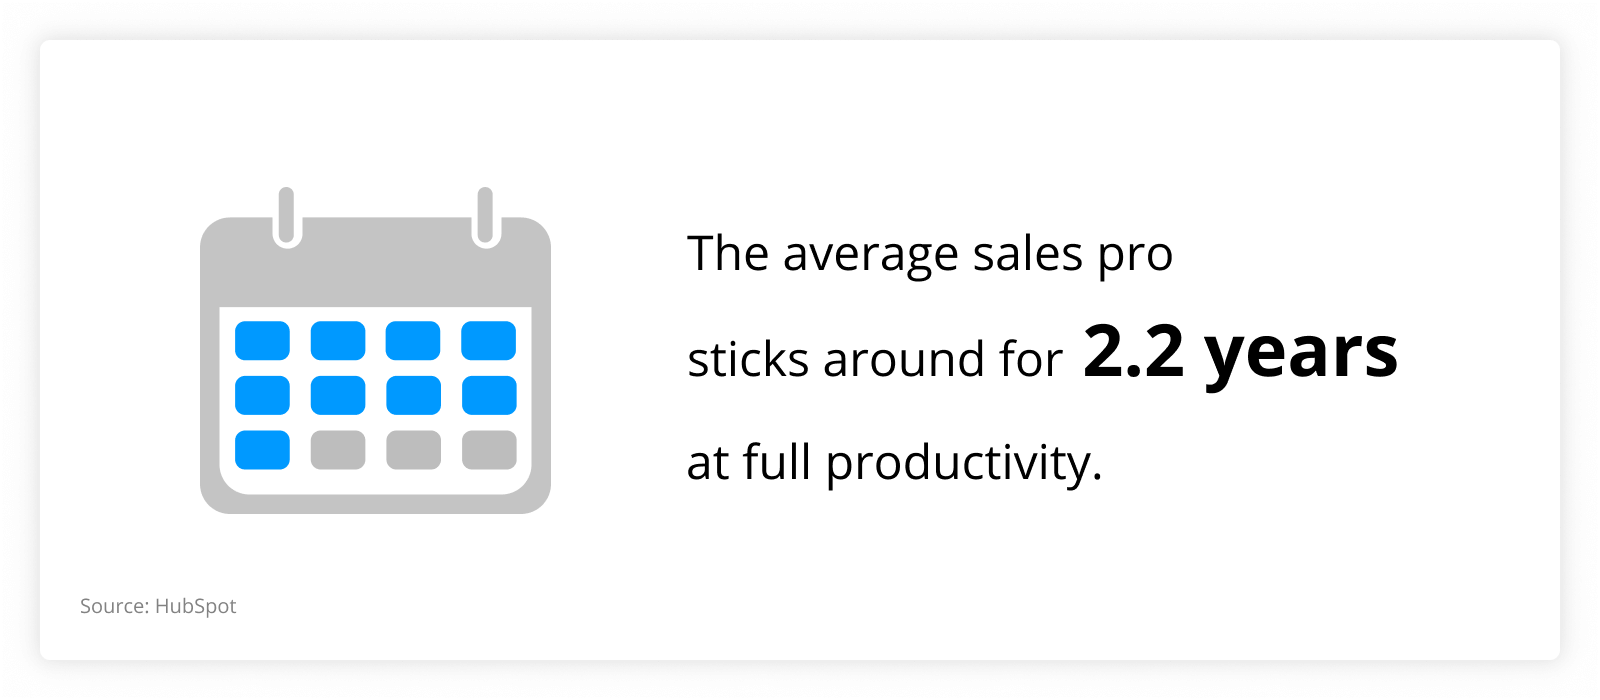 graph showing that The average sales pro sticks around for 2.2 years at full productivity.